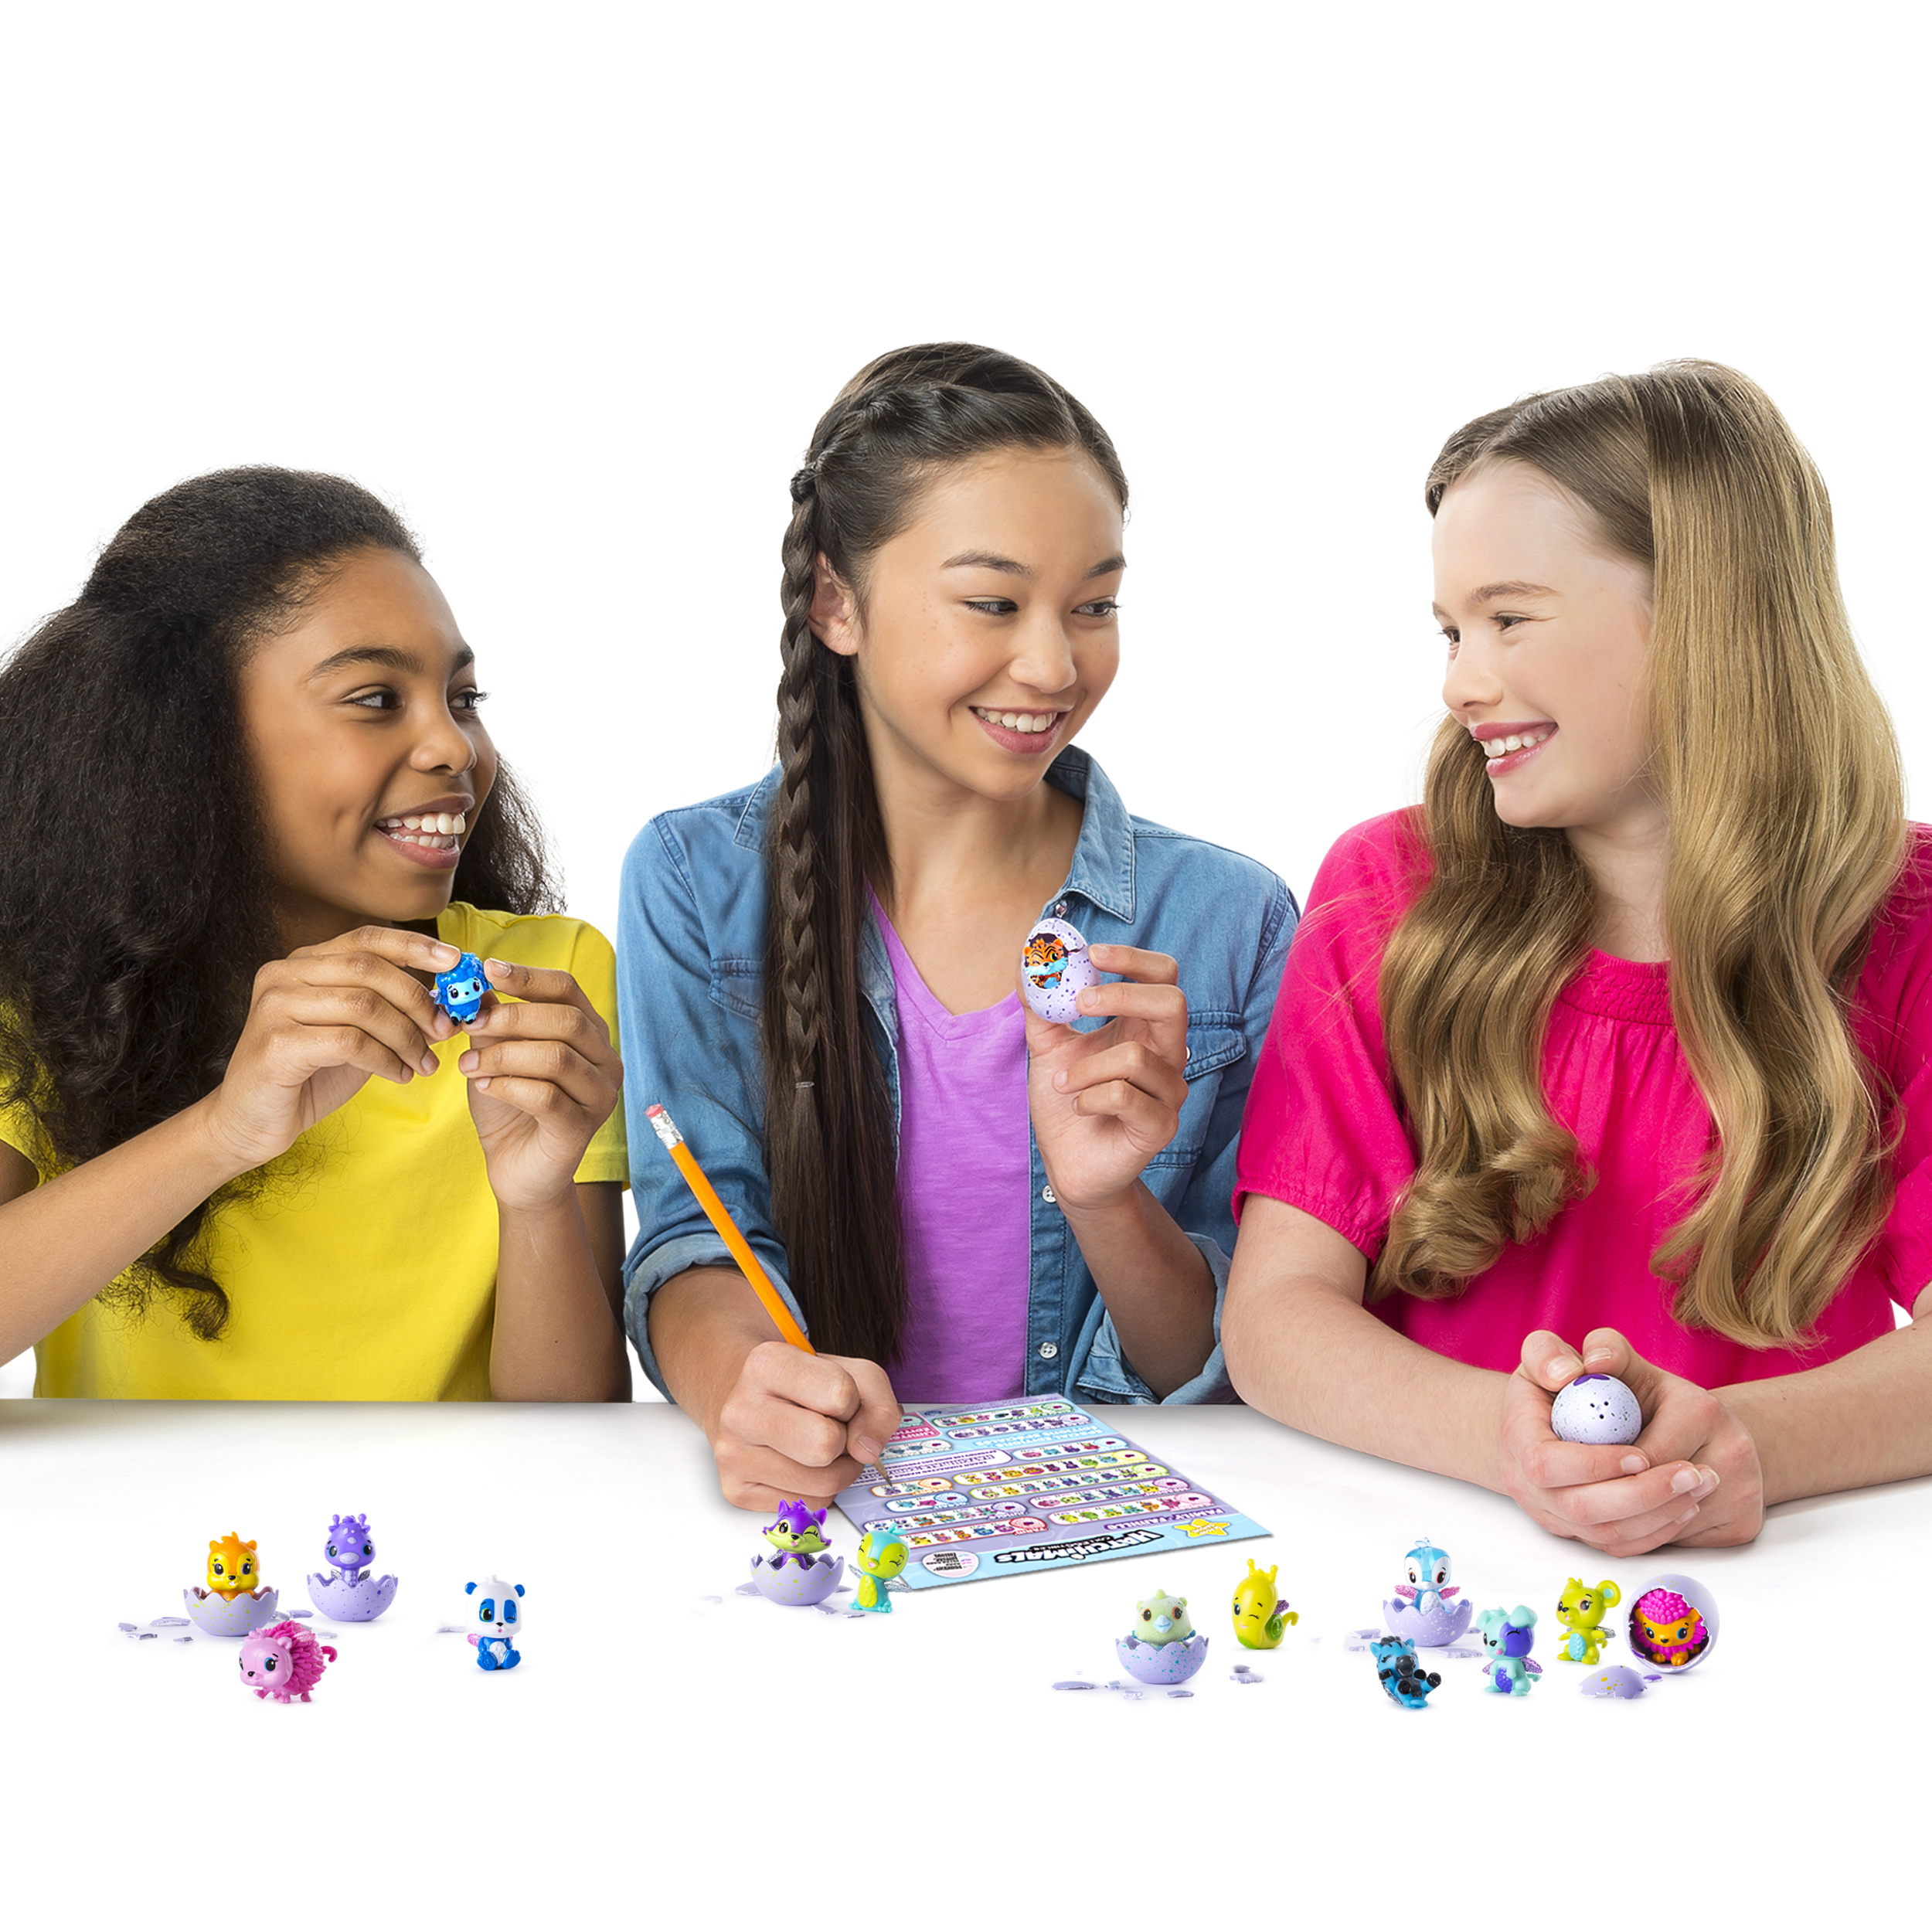 Hatchimals, CollEGGtibles, 4 Pack + Bonus (Styles & Colors May Vary) by Spin Master - Electronic Pets - image 6 of 14